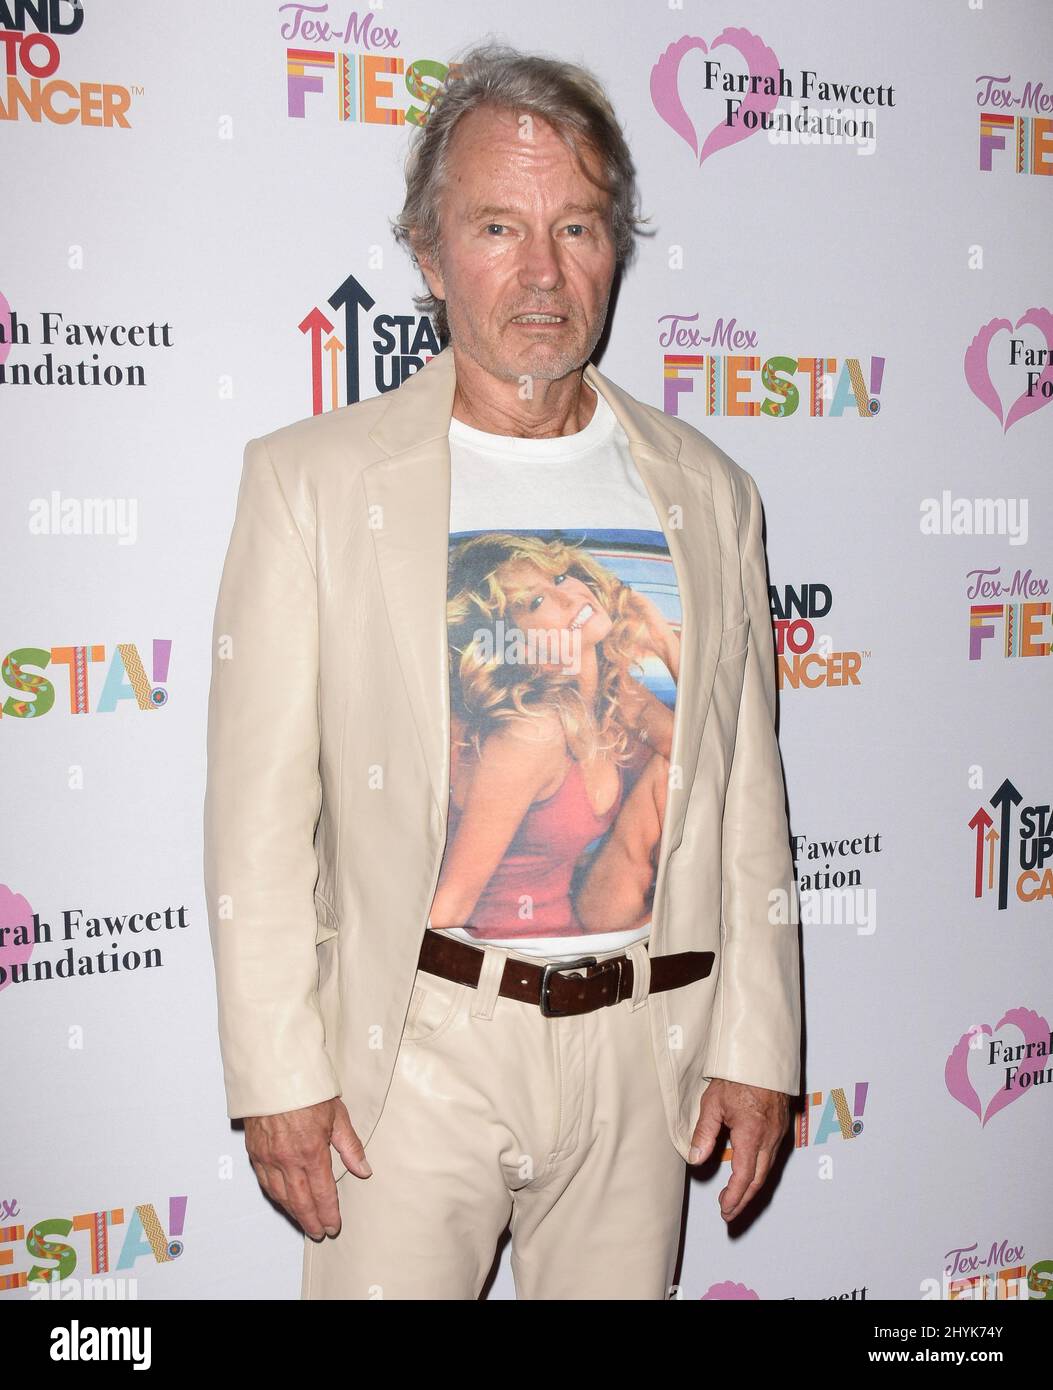 John Savage at The Farrah Fawcett Foundation's Tex-Mex Fiesta held at the Wallis Annenberg Center for the Performing Arts on September 6, 2019 in Beverly Hills, USA. Stock Photo